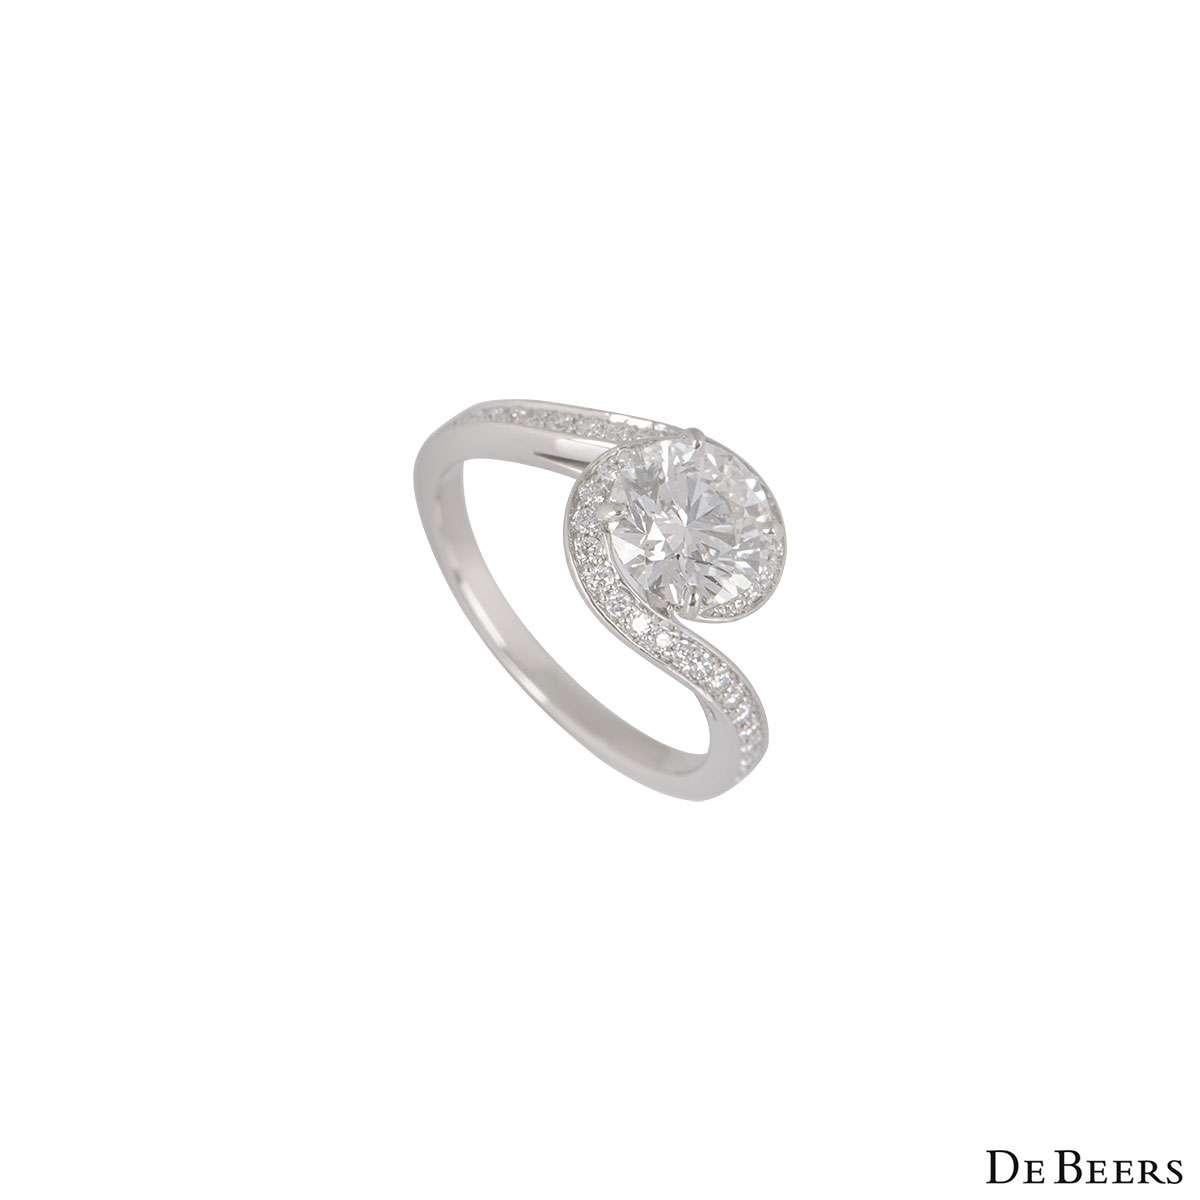 A stunning platinum diamond ring by De Beers from the Caress Collection. The ring features a round brilliant cut diamond within a four claw setting with a weight of 1.24ct, H in colour and SI1 clarity with a swirl of pave set diamonds around it